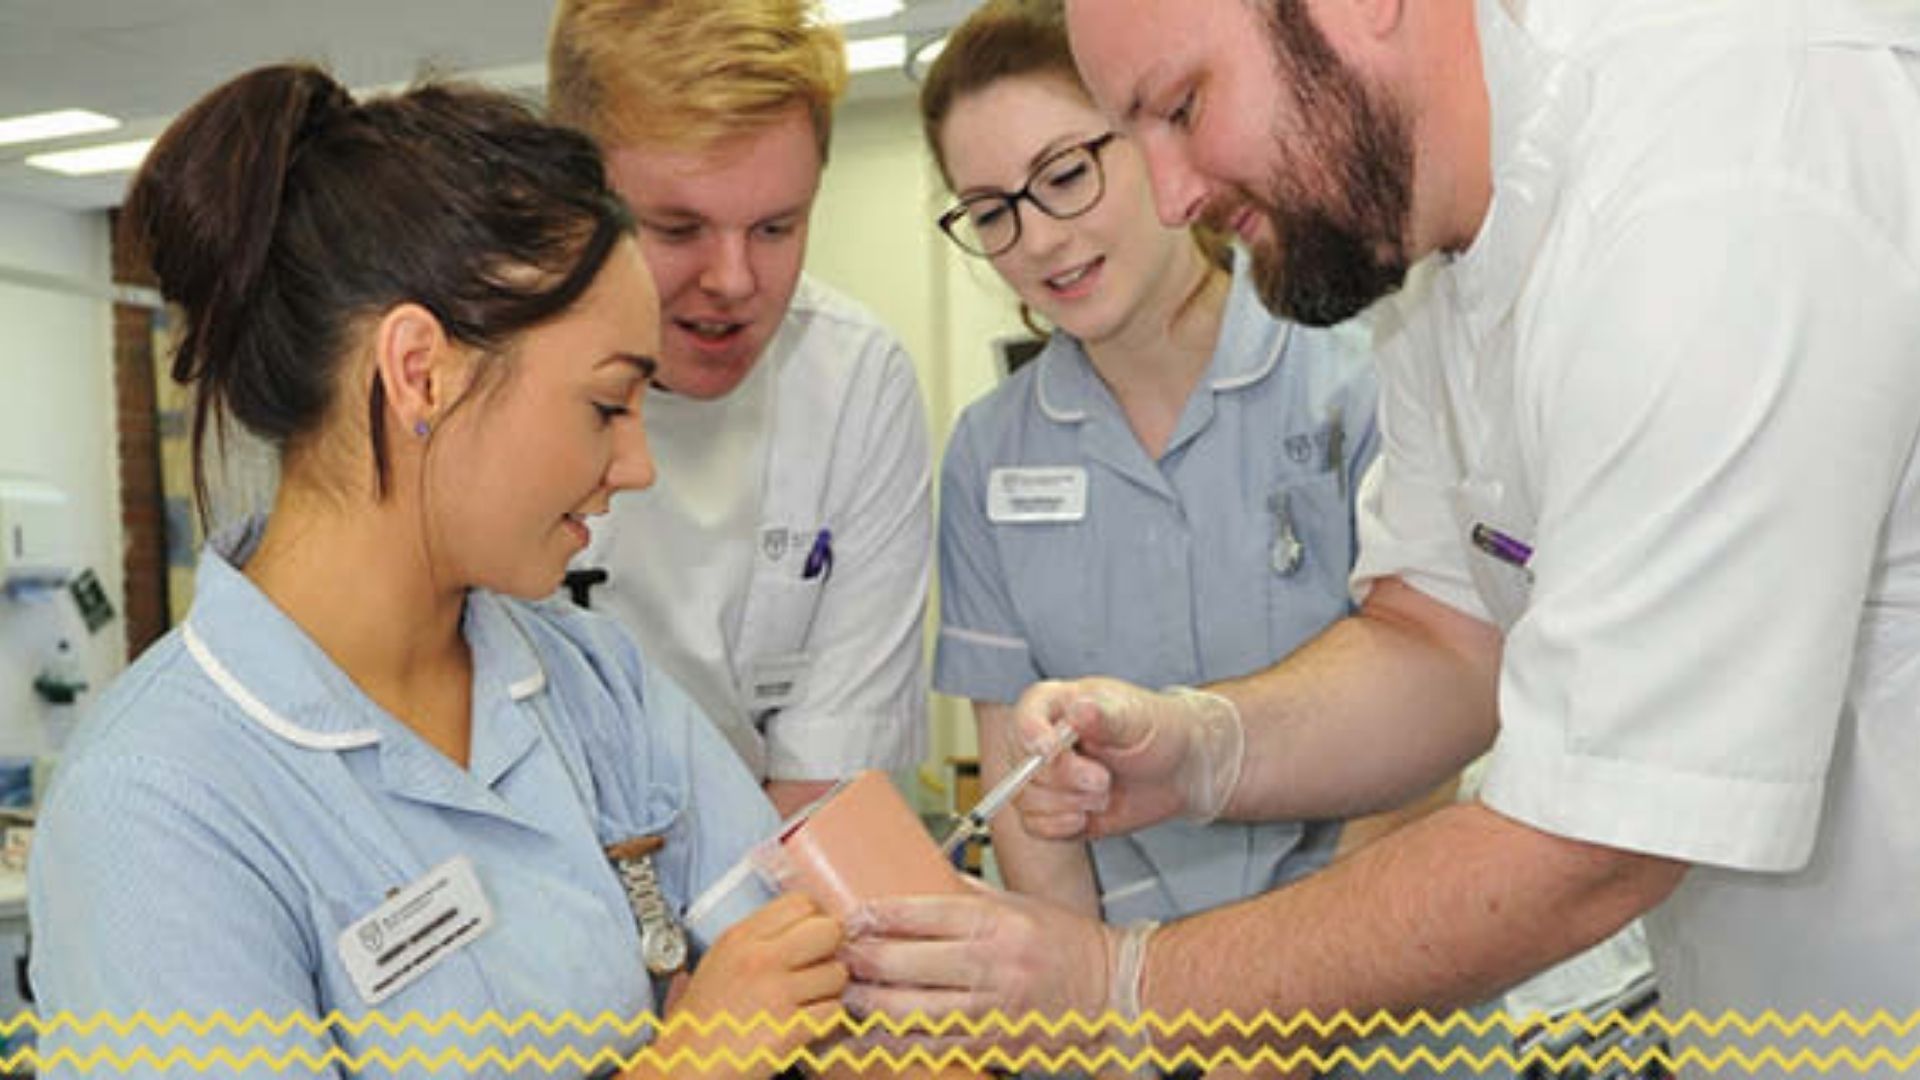 A student nurse giving an injection to a dummy arm in front of 3 other students